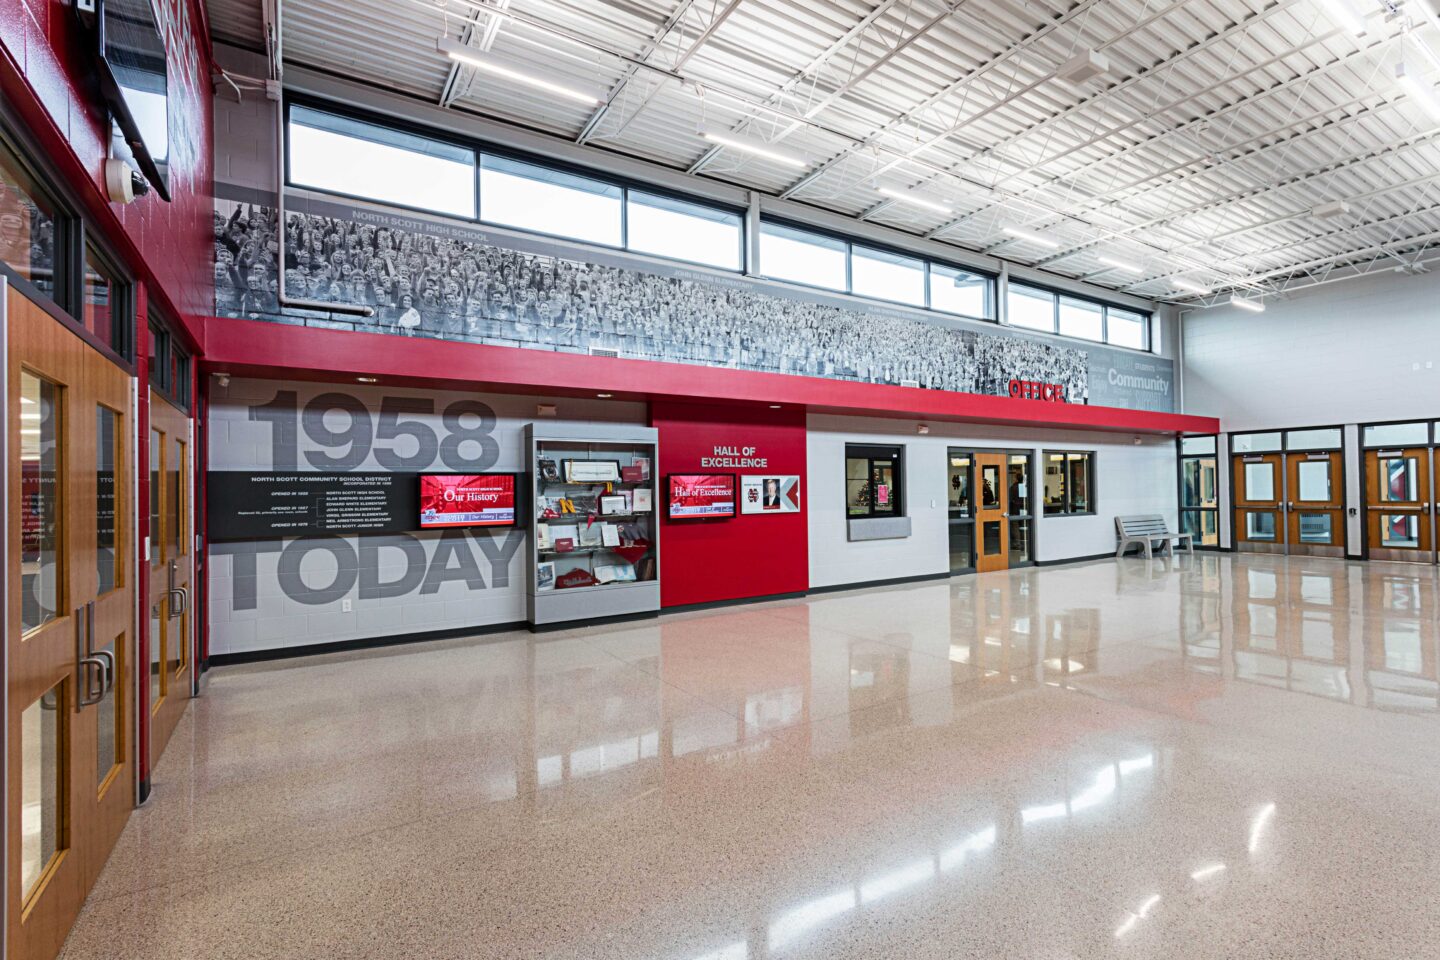 A view of one branded wall of the school's Hall of Excellence, featuring a trophy case and digital screens